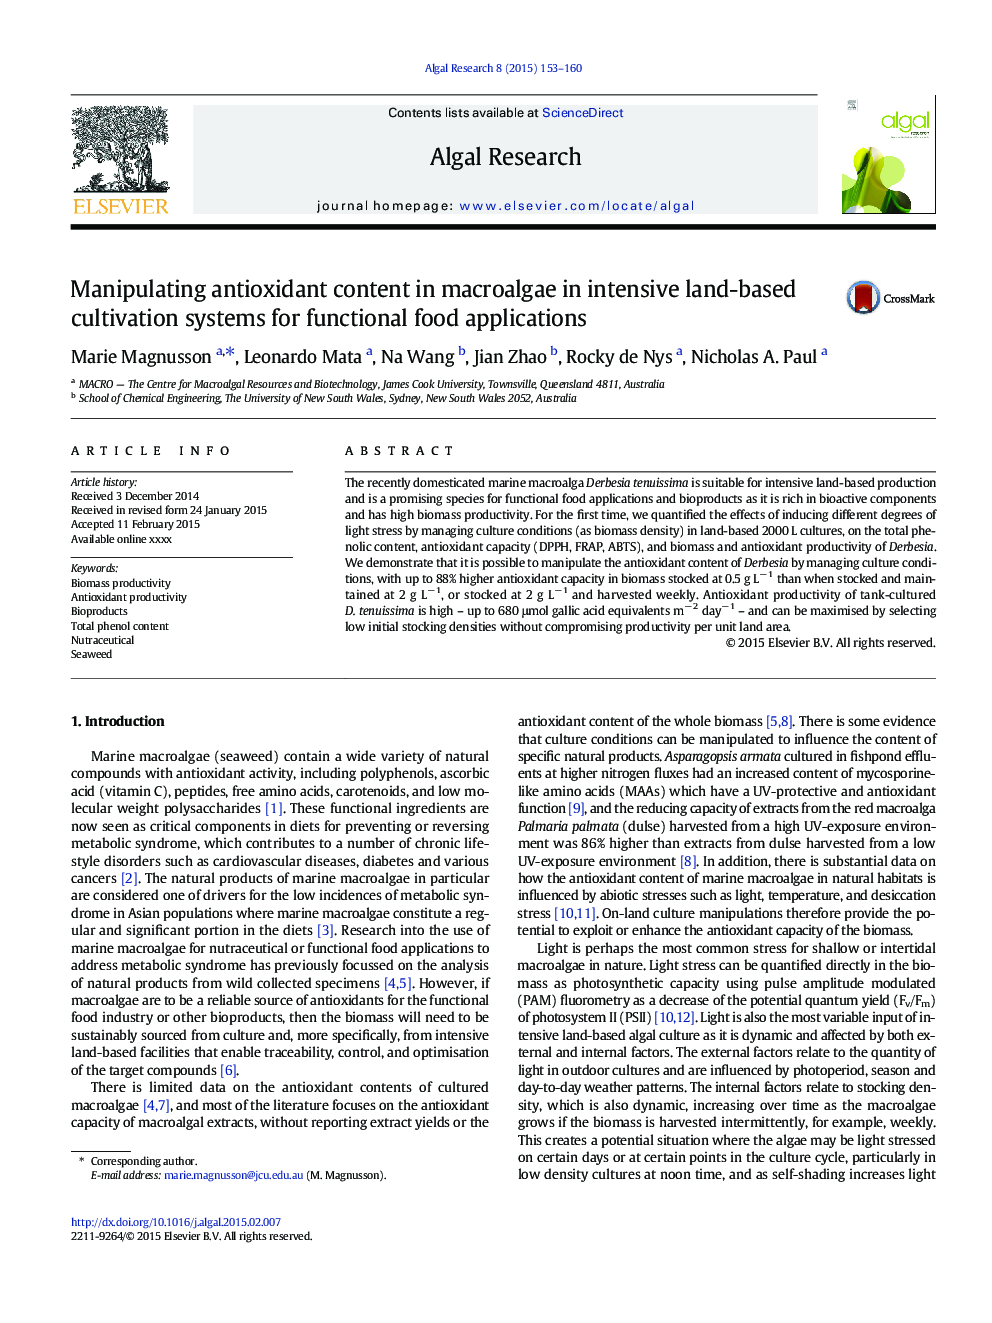 Manipulating antioxidant content in macroalgae in intensive land-based cultivation systems for functional food applications